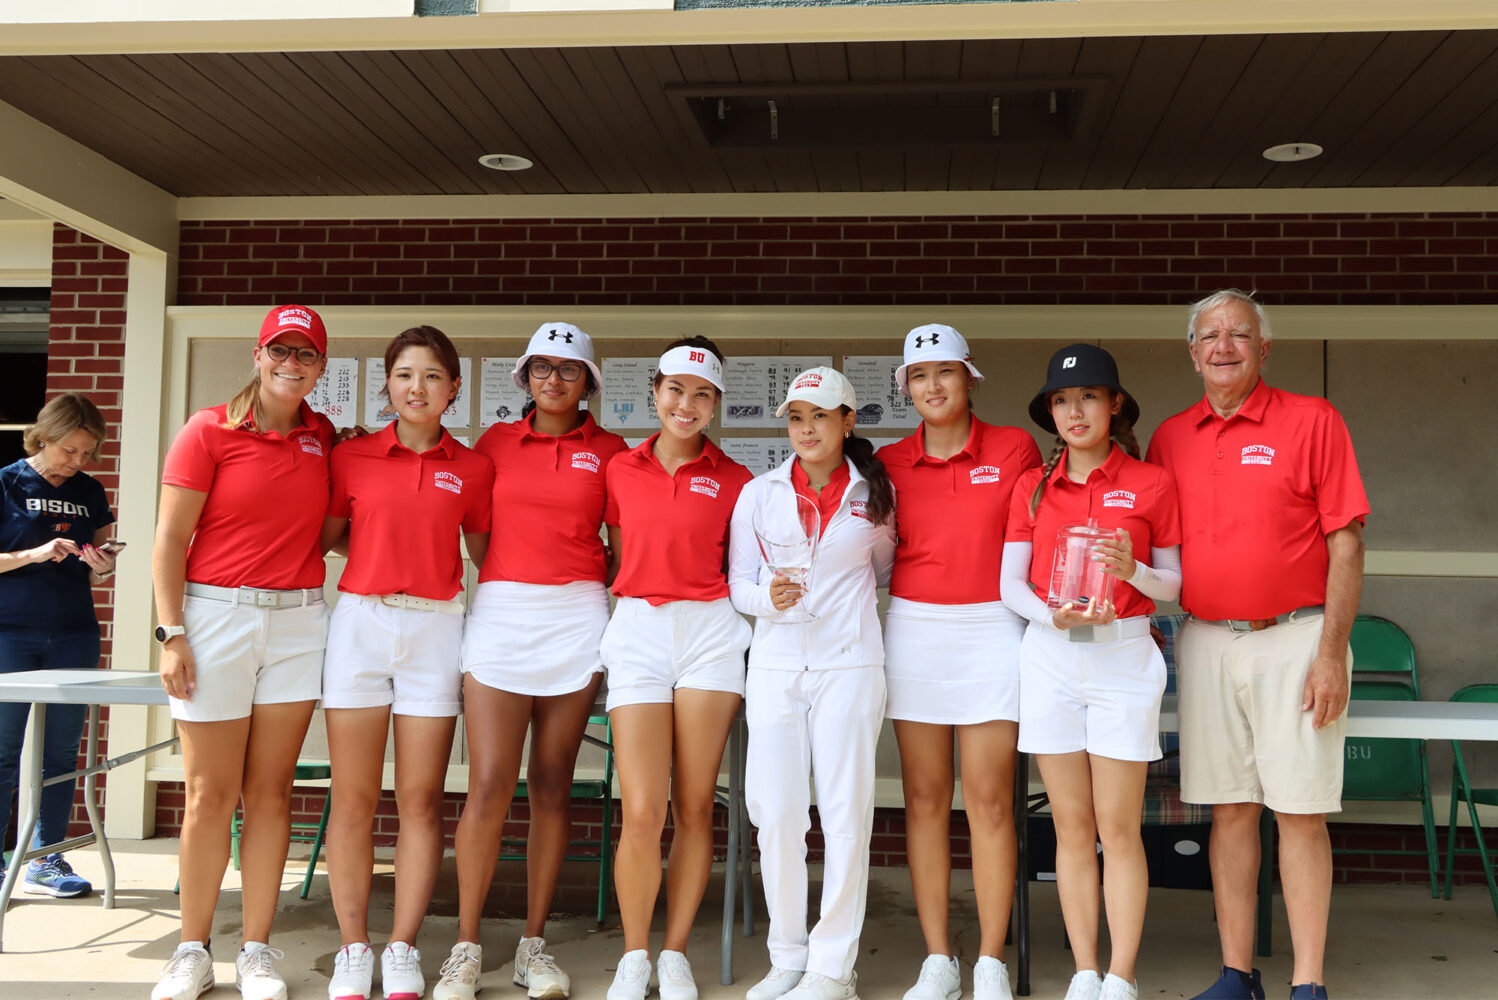 Members of the Boston University women’s golf team after capturing the Bucknell Invitational in Lewisburg, Pa., in September 2023. The Terriers will play the same course this weekend for the Patriot League championship. Pictured above: assistant coach Claire Edwards (left), Hibiki Adachi (CAS’27), Annika Manjunath (CAS’25), Madison Takai (Questrom’27), Victoria Takai (Questrom’25), Meiqi Gao (COM’25), Christy Chen (CAS’25) and head coach Bruce Chalas. Photo courtesy of Bucknell Athletics